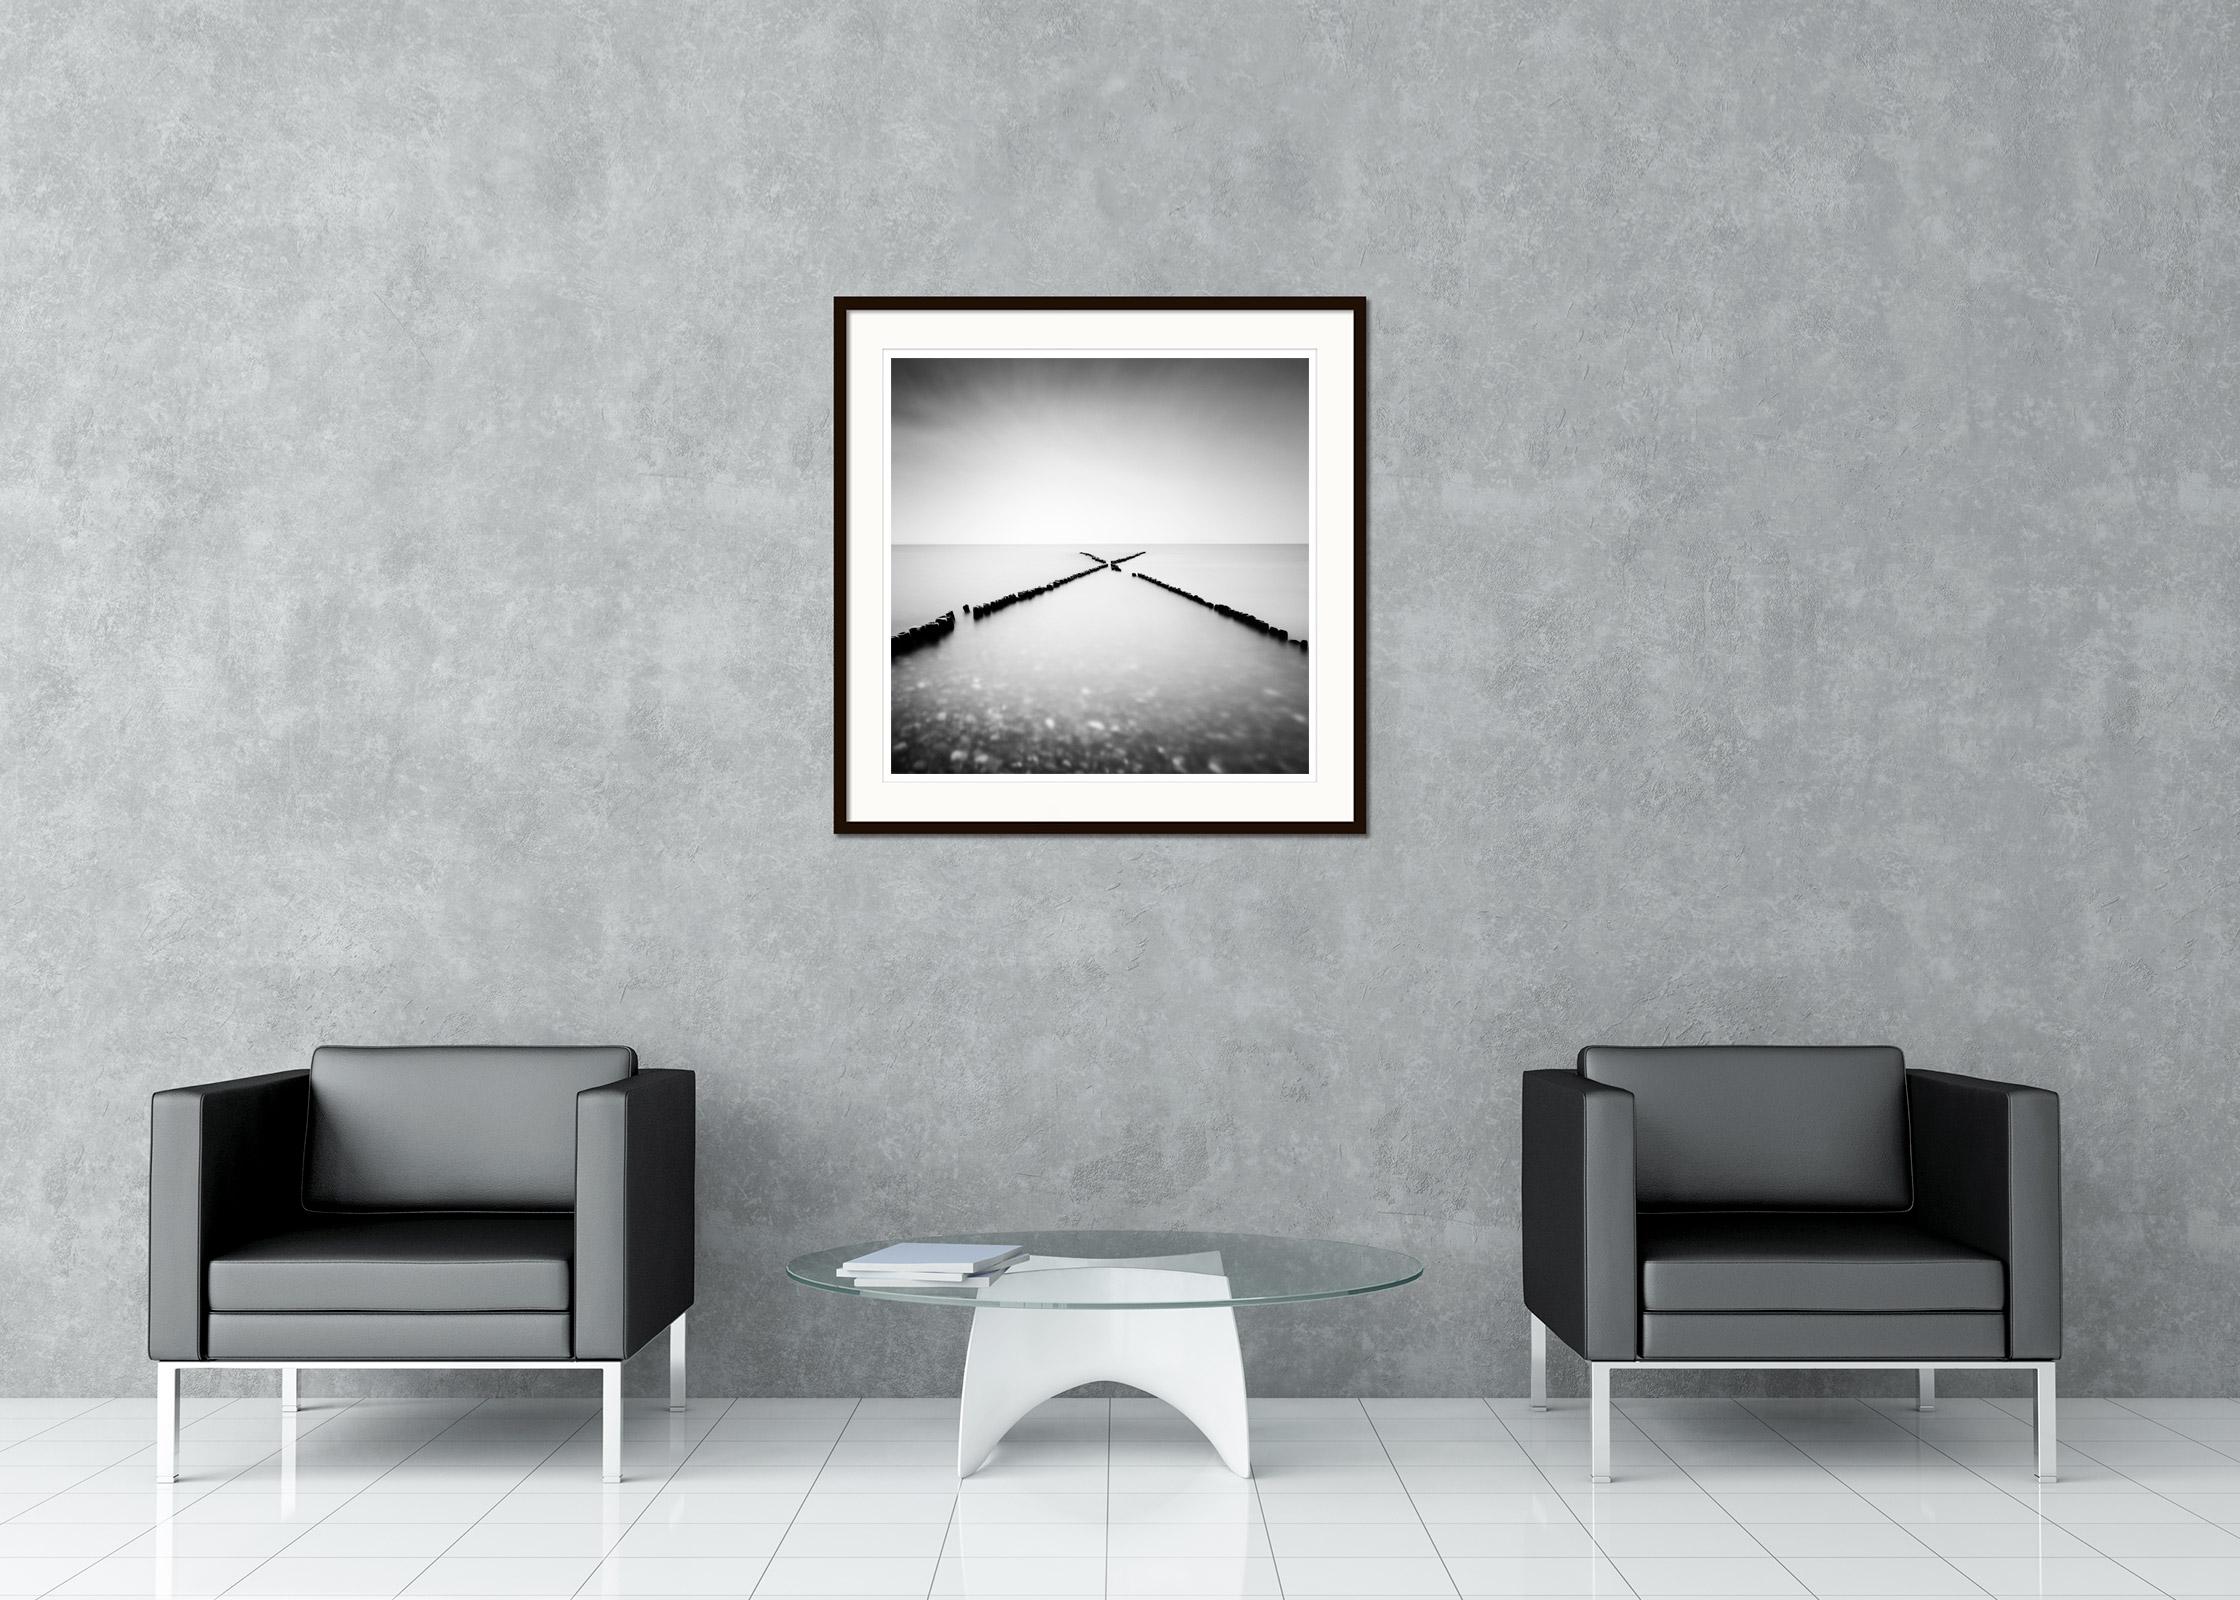 Black and white fine art long exposure waterscape - landscape photography. Archival pigment ink print as part of a limited edition of 10. All Gerald Berghammer prints are made to order in limited editions on Hahnemuehle Photo Rag Baryta. Each print